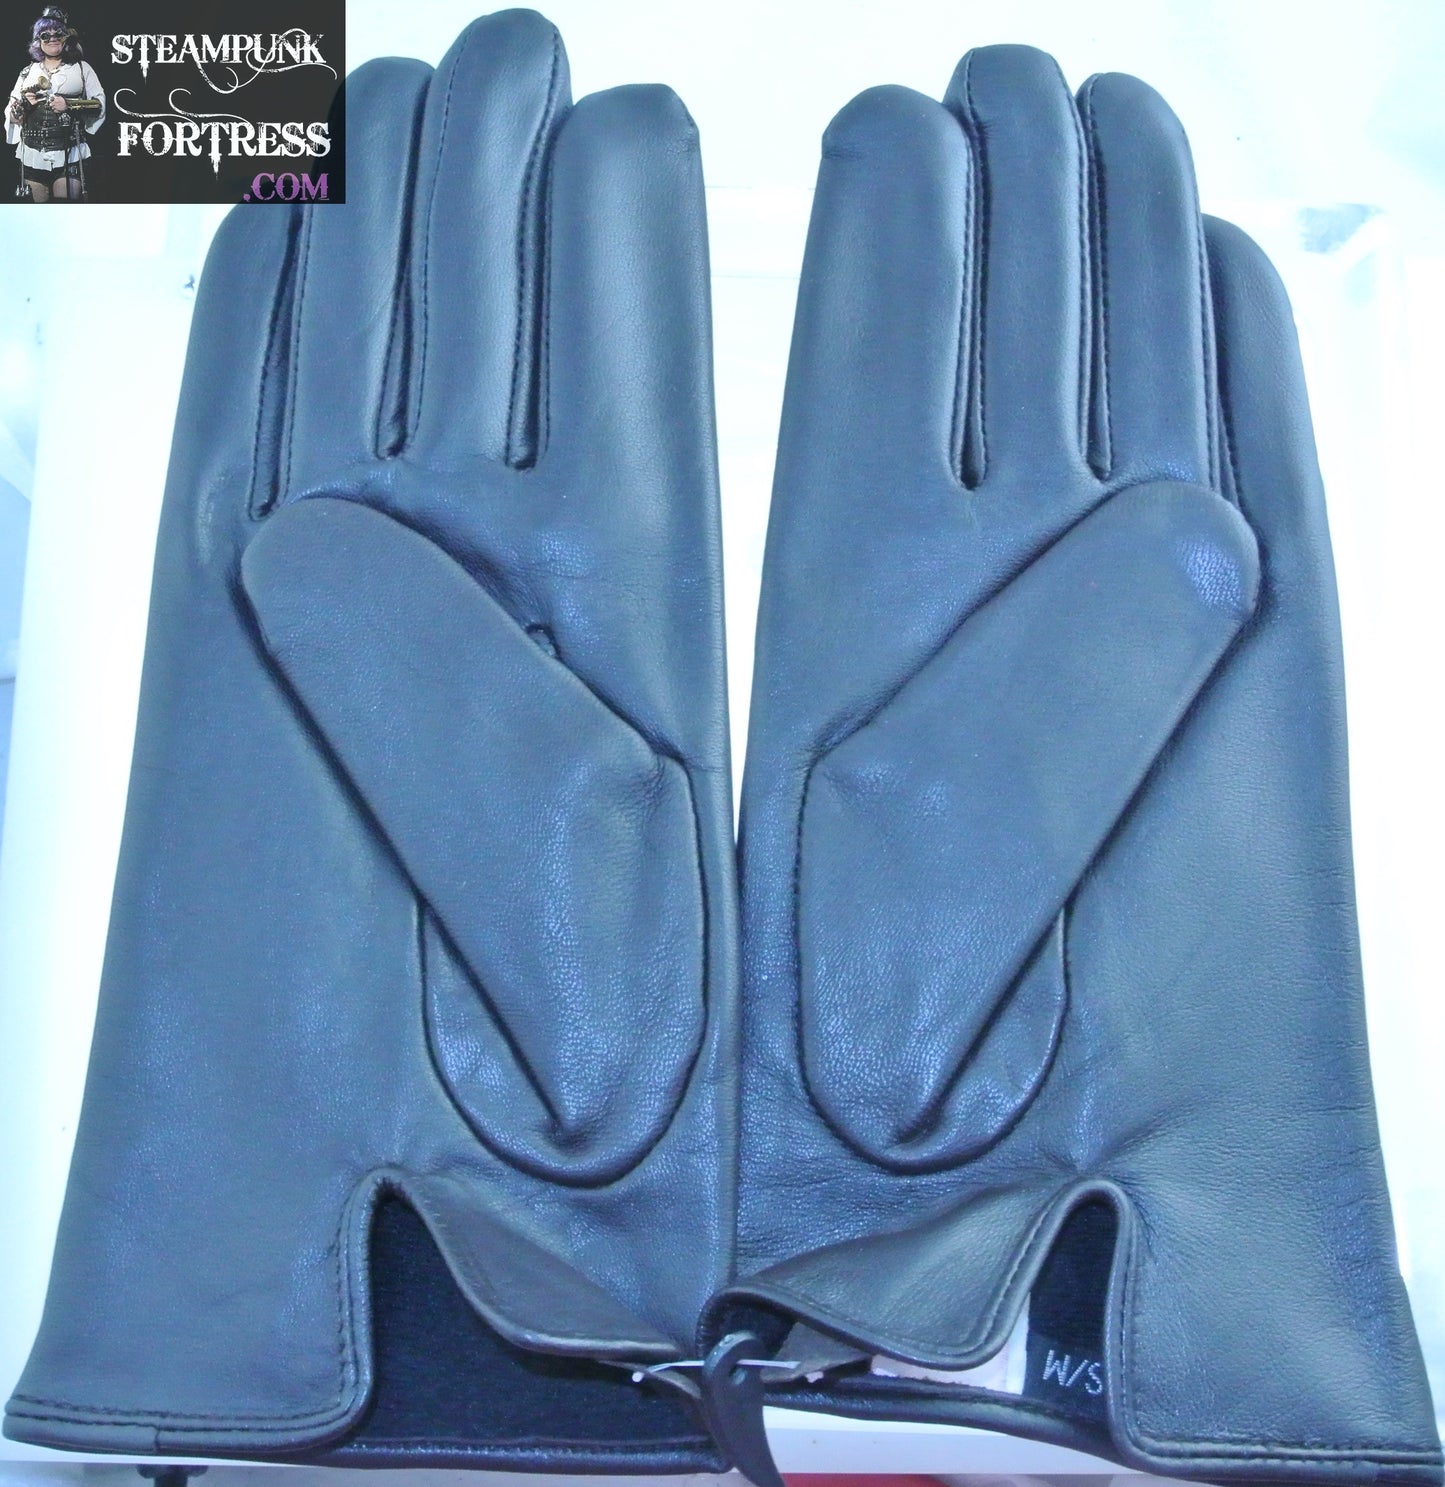 NEW DARK BROWN NEARLY BLACK LEATHER GLOVES SMALL MEDIUM REDFISH - MASS PRODUCED